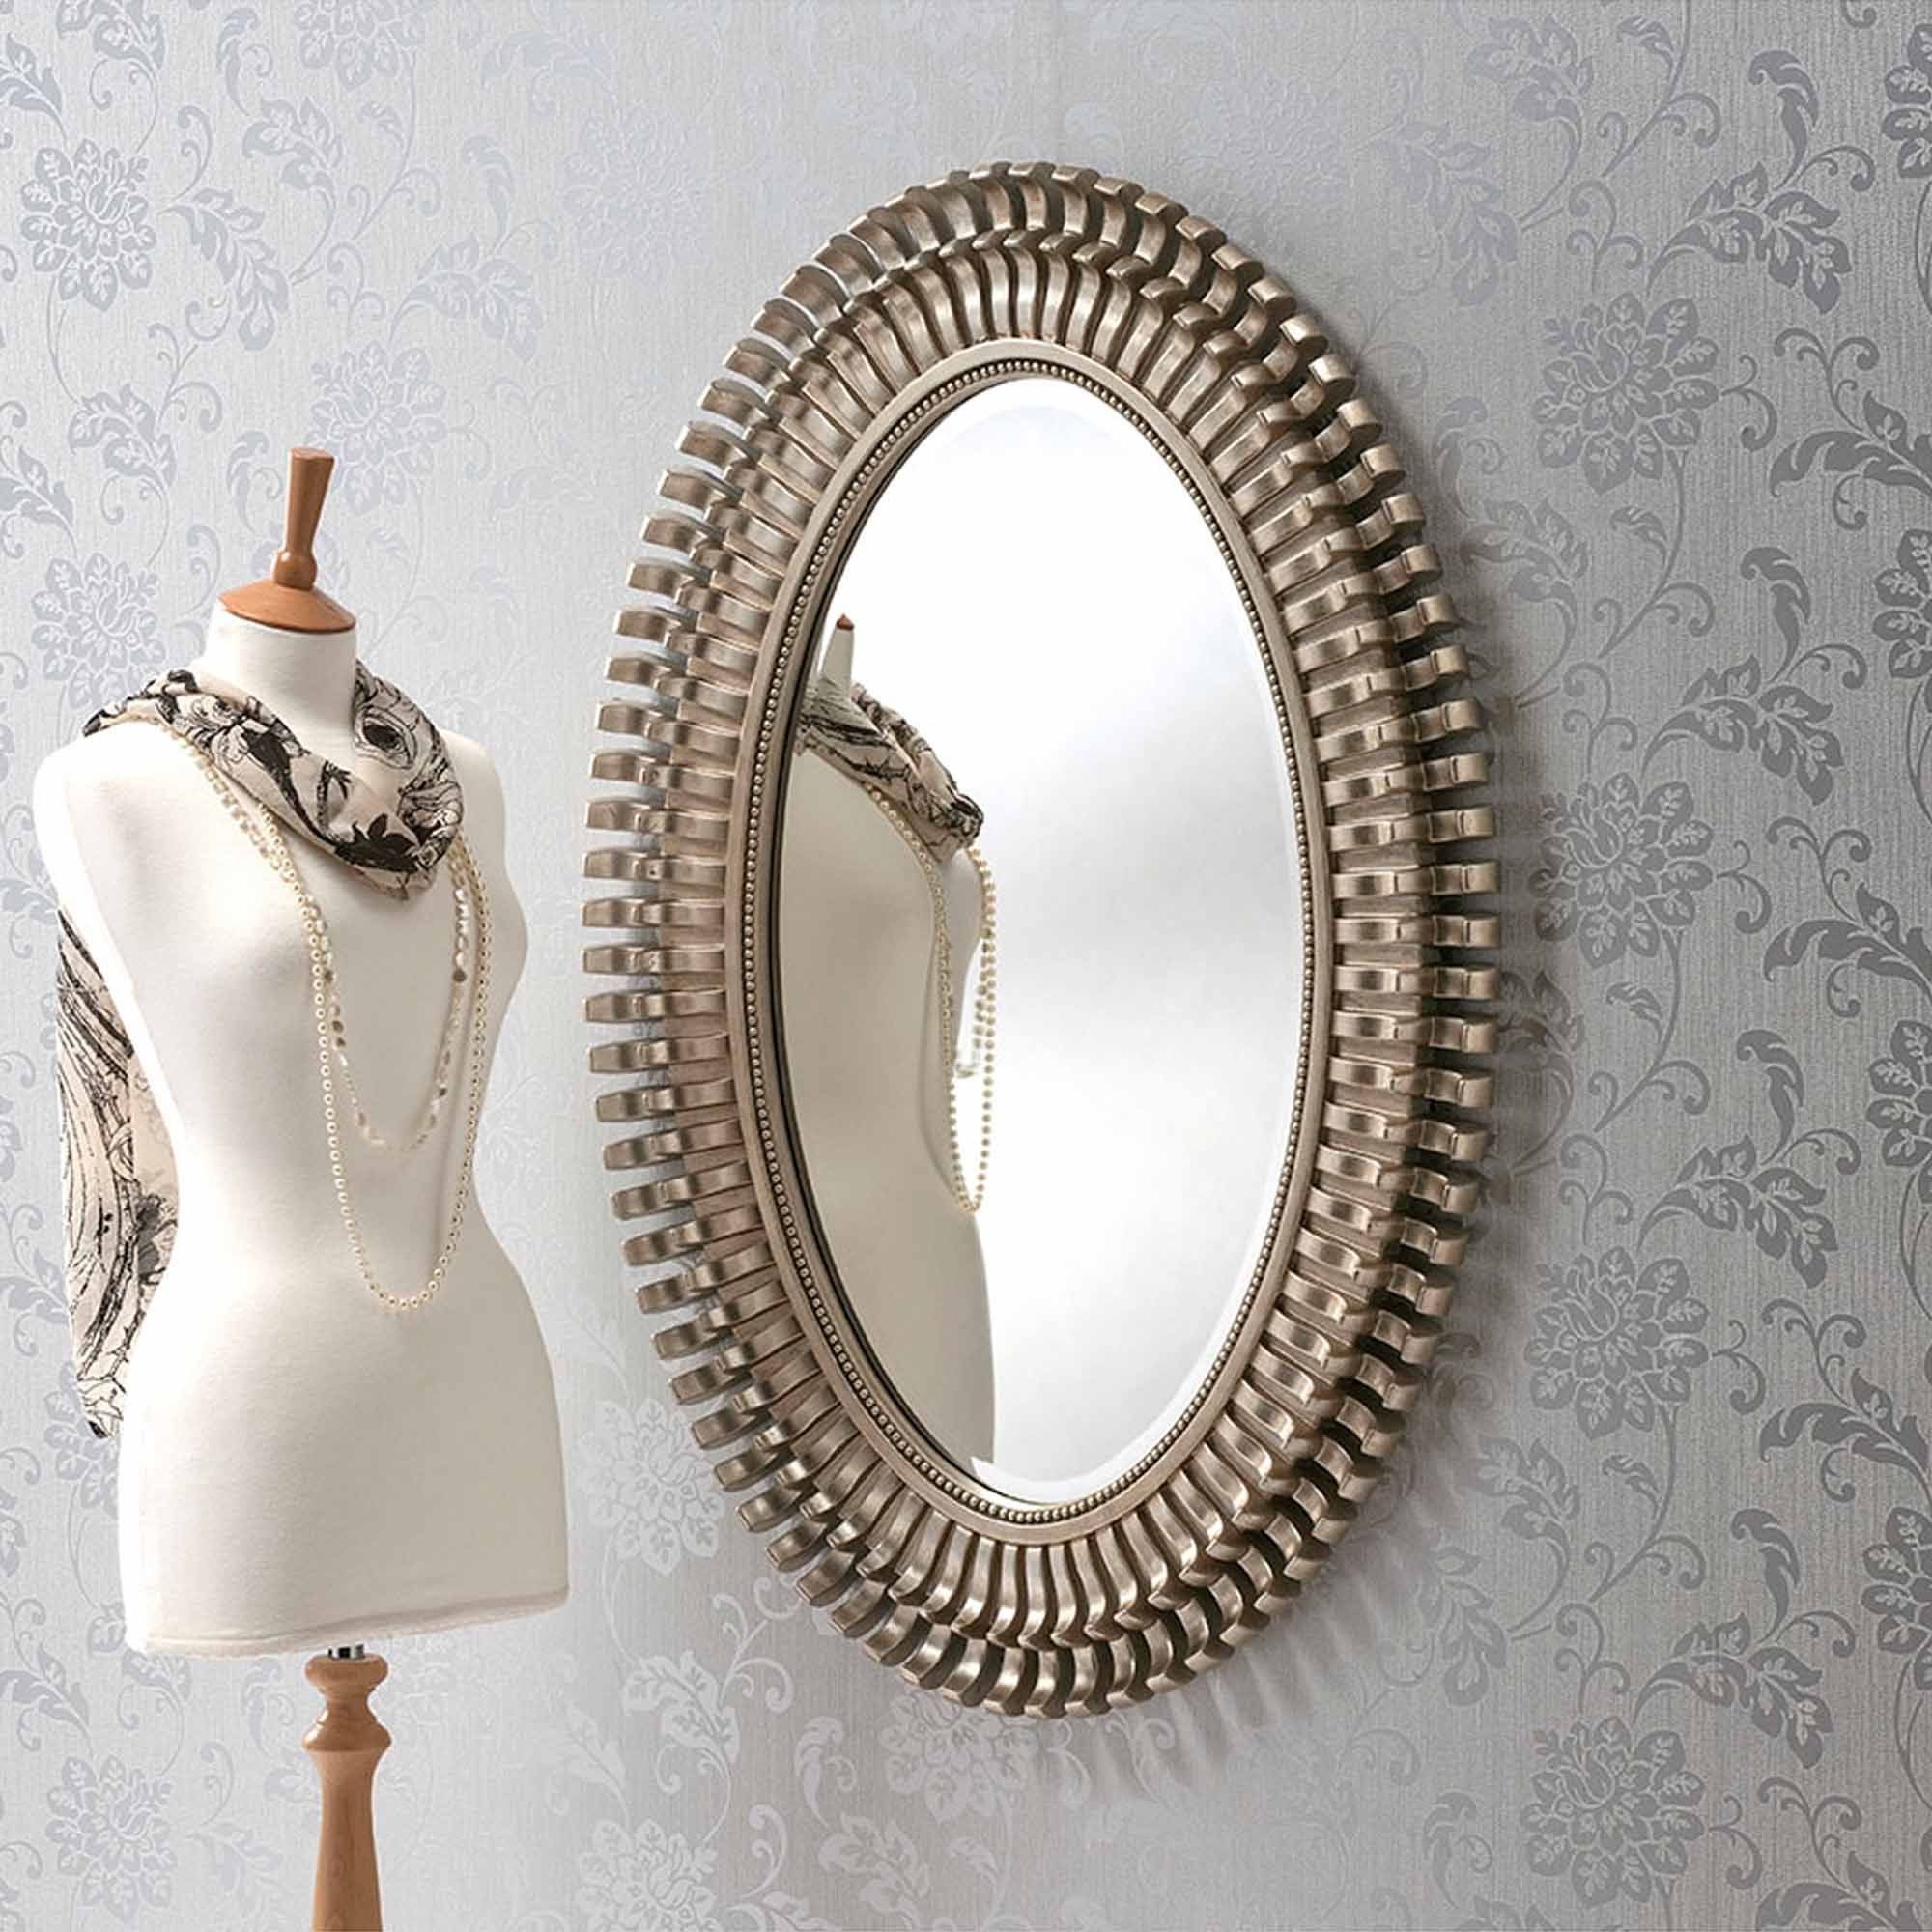 Fashionable Silver Decorative Mirror Intended For Silver Decorative Wall Mirrors (View 11 of 15)